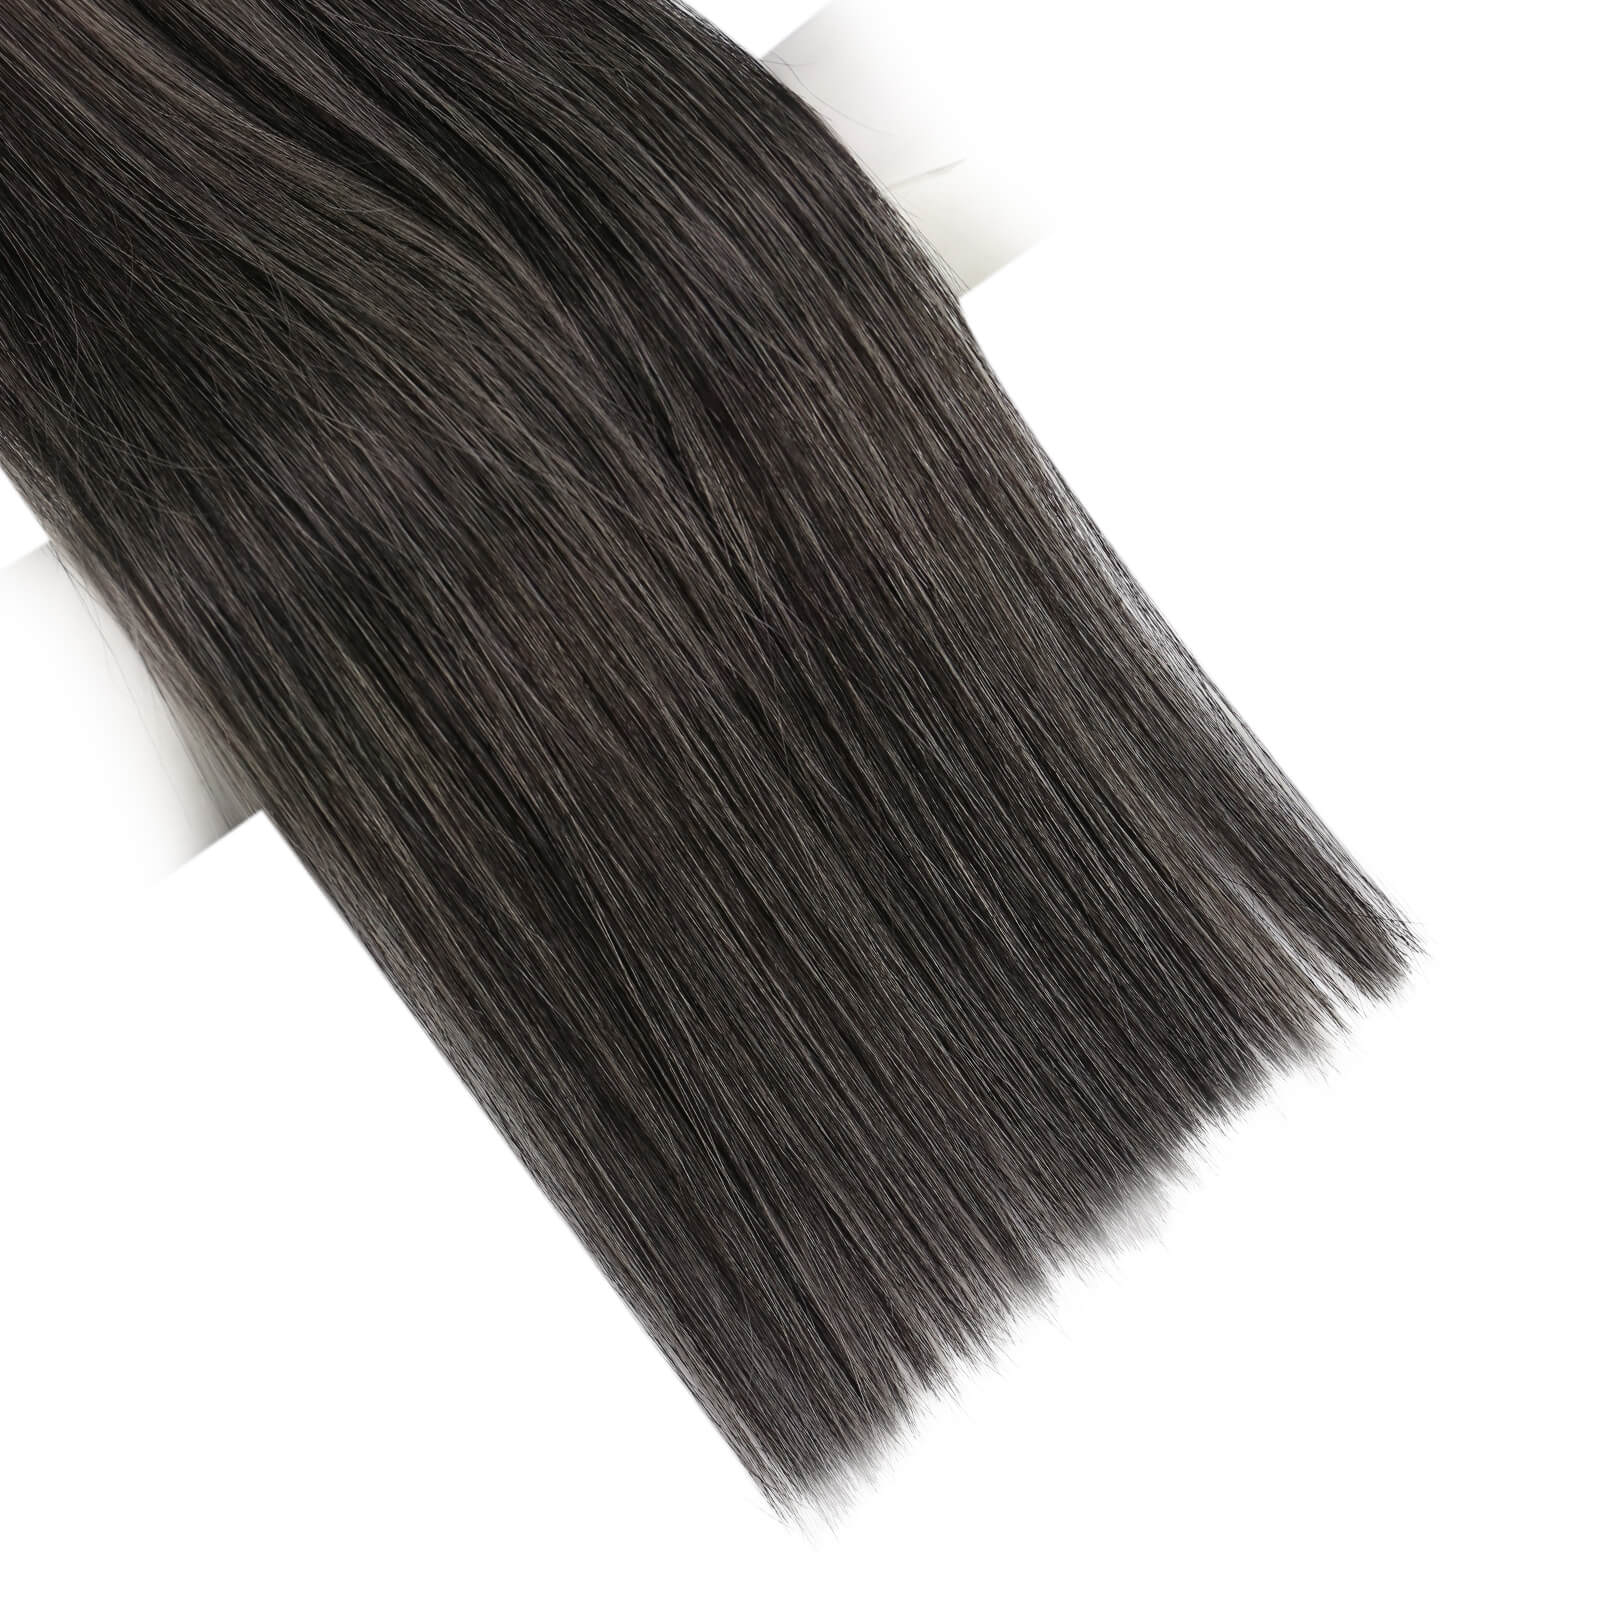 professional weft hair extensions flat weft hair extensions wholesale